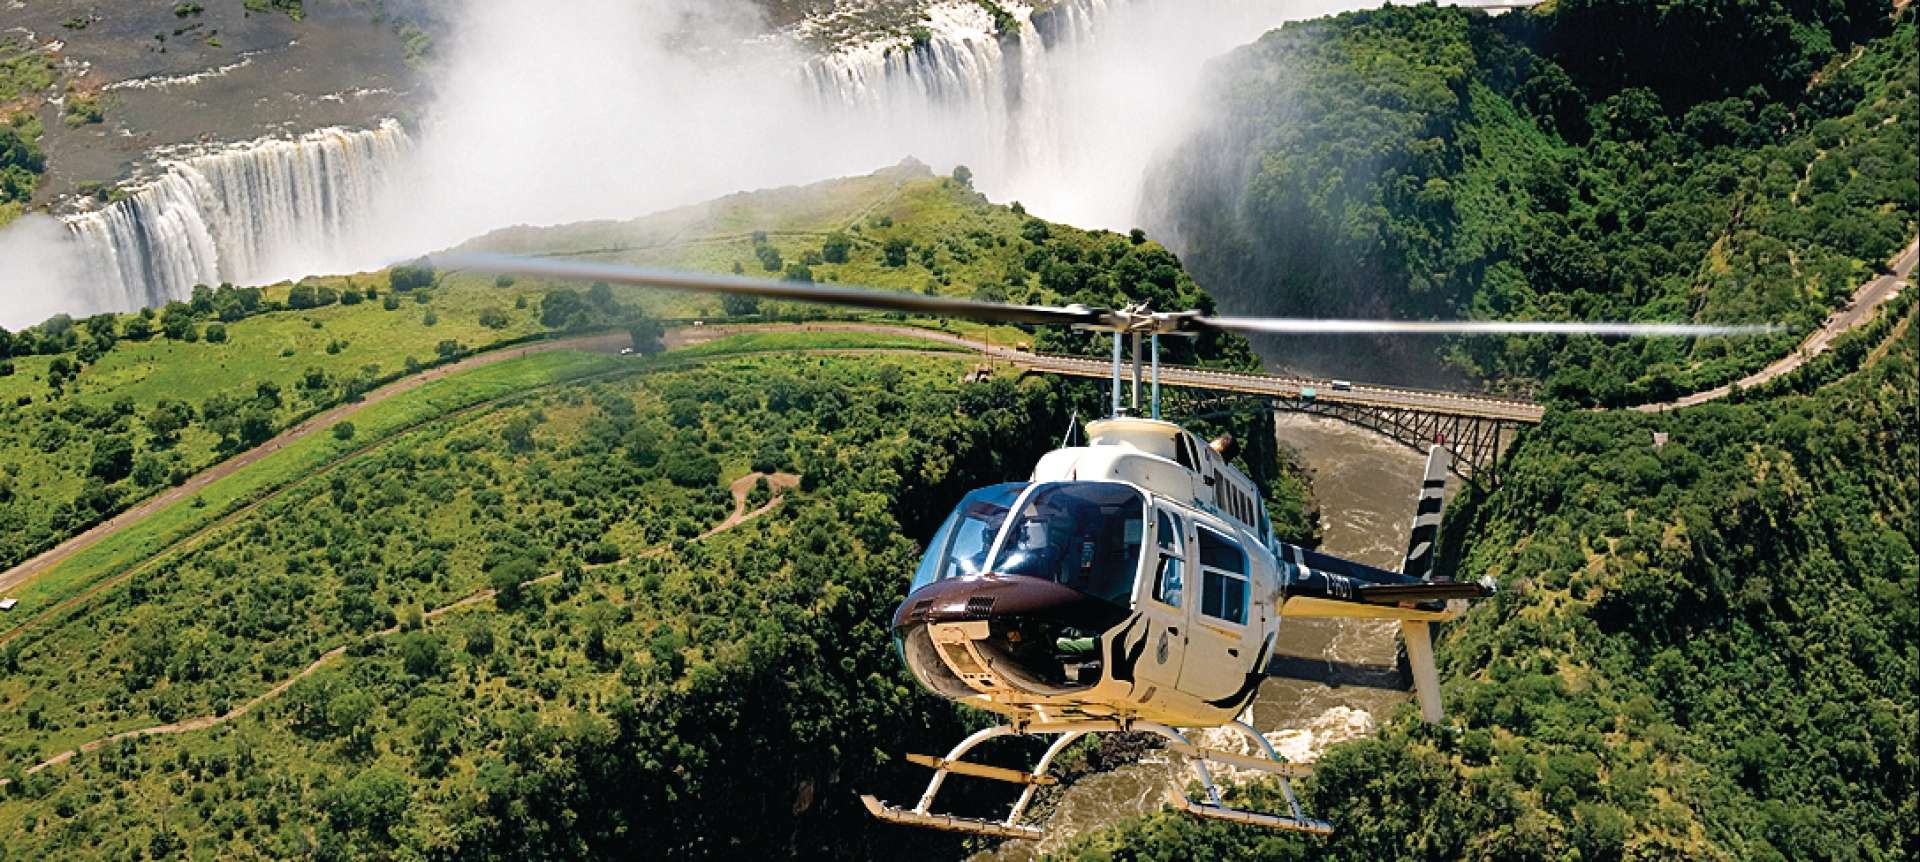 Good times for lovers at Zimbabwe, the Victoria Falls